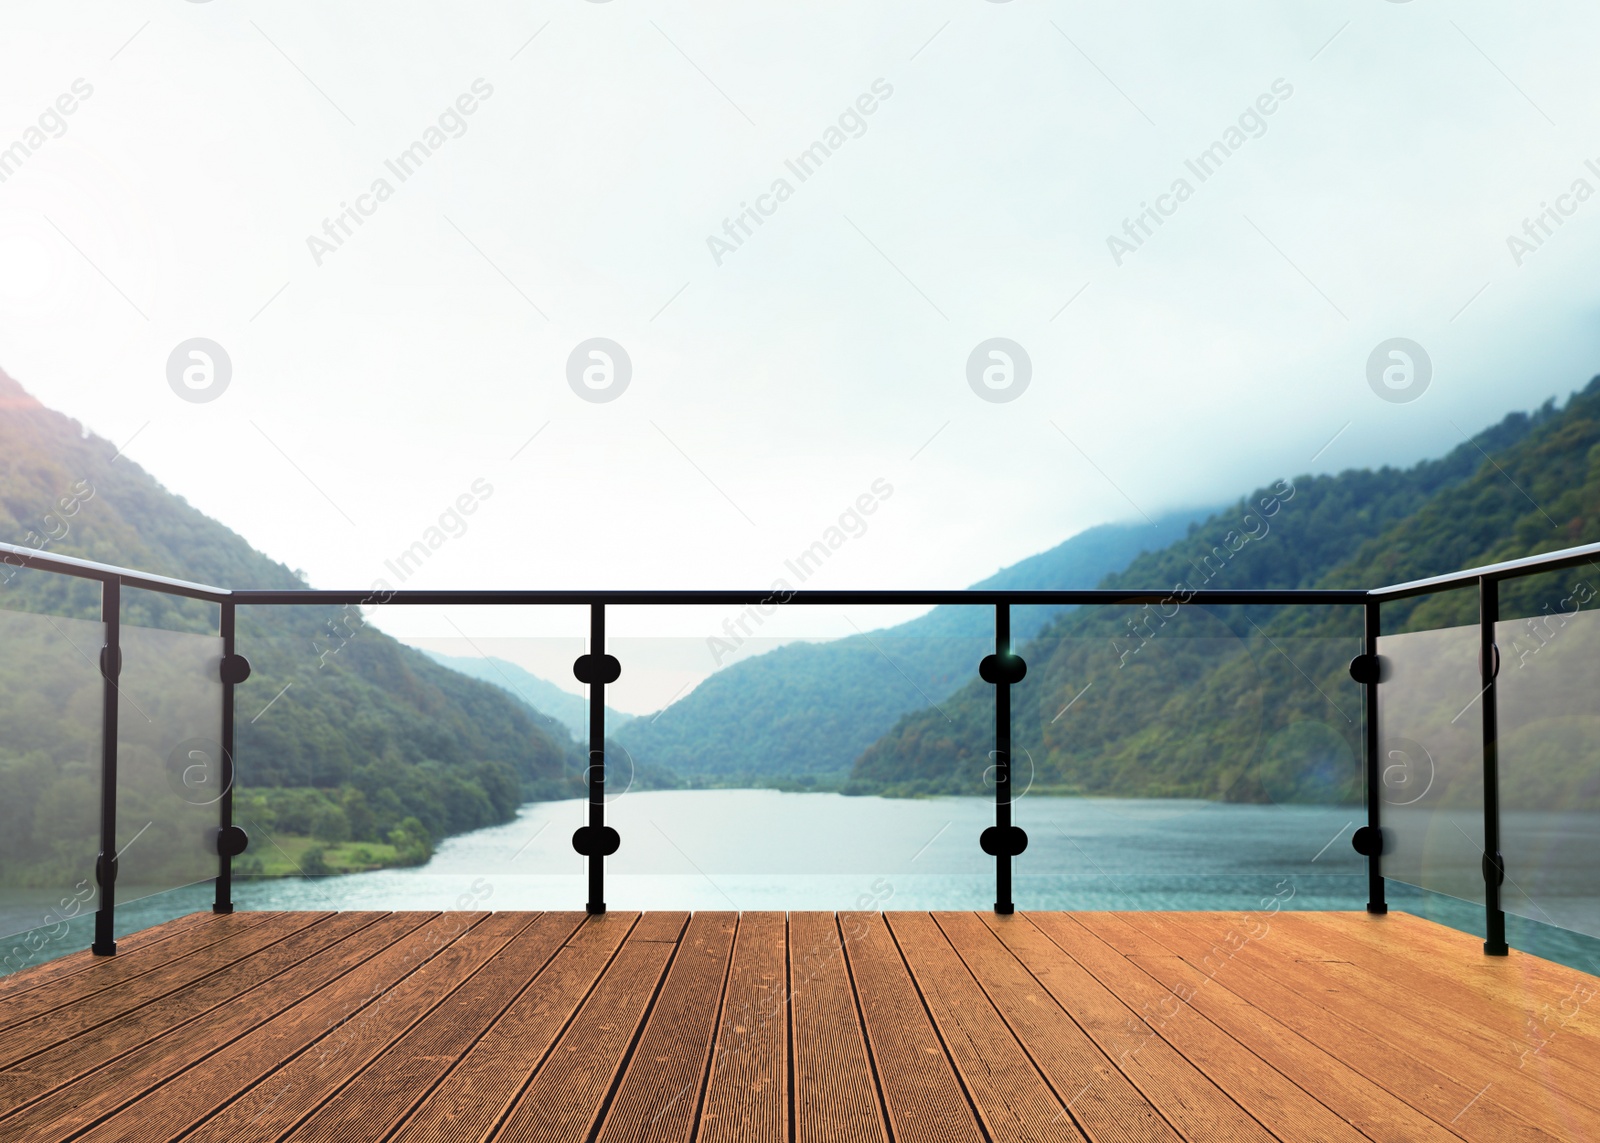 Image of Outdoor wooden terrace revealing picturesque view on lake between mountains